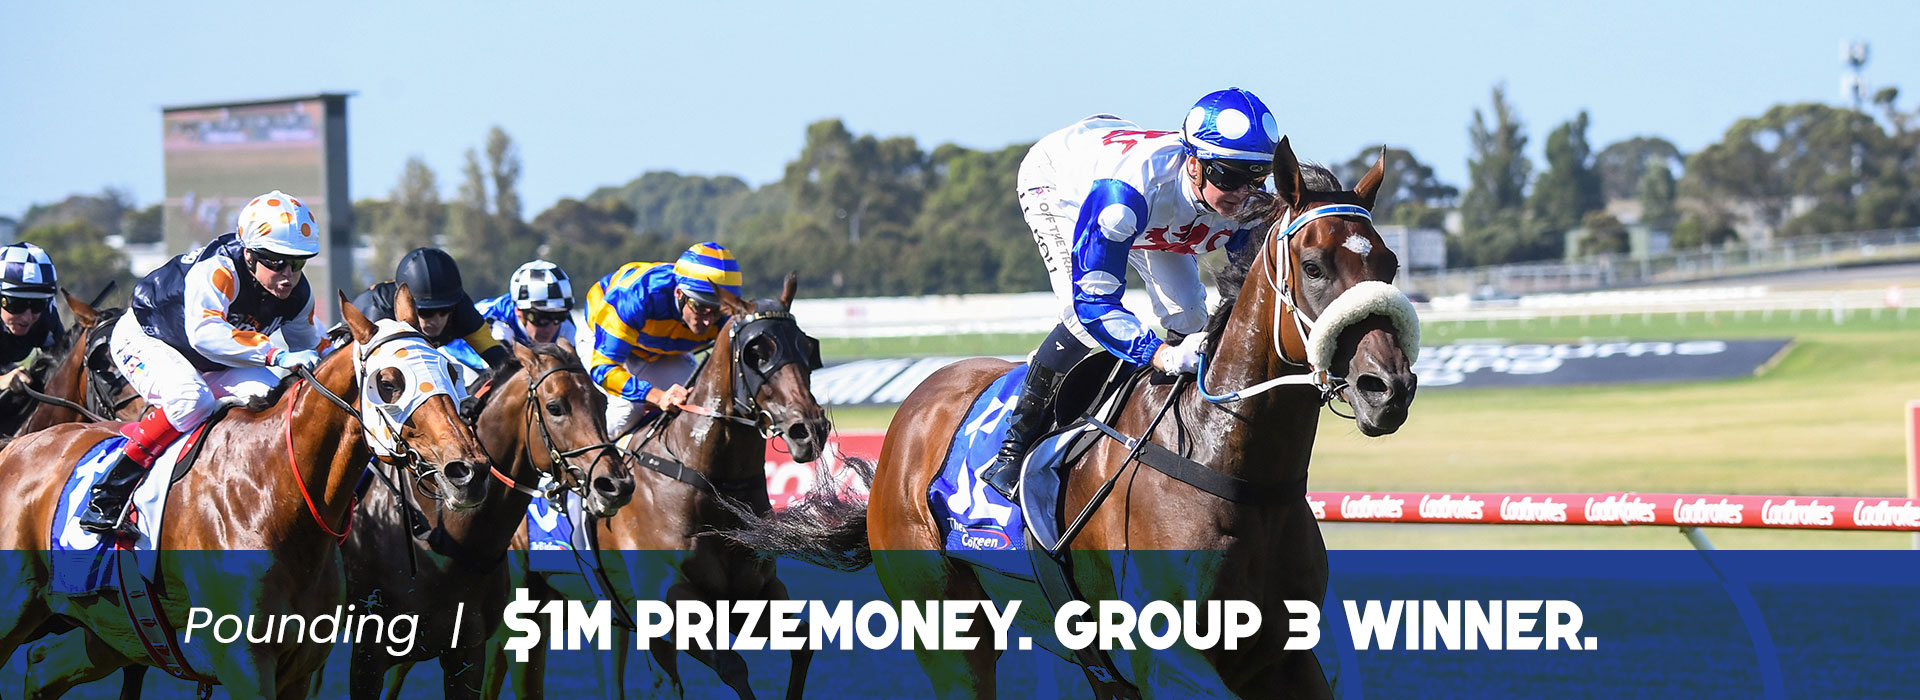 Pounding 26 Starts-7:6:3. Prizemoney: $982,290. Group 3 Winner. 3rd in Group 1 Australia Cup.